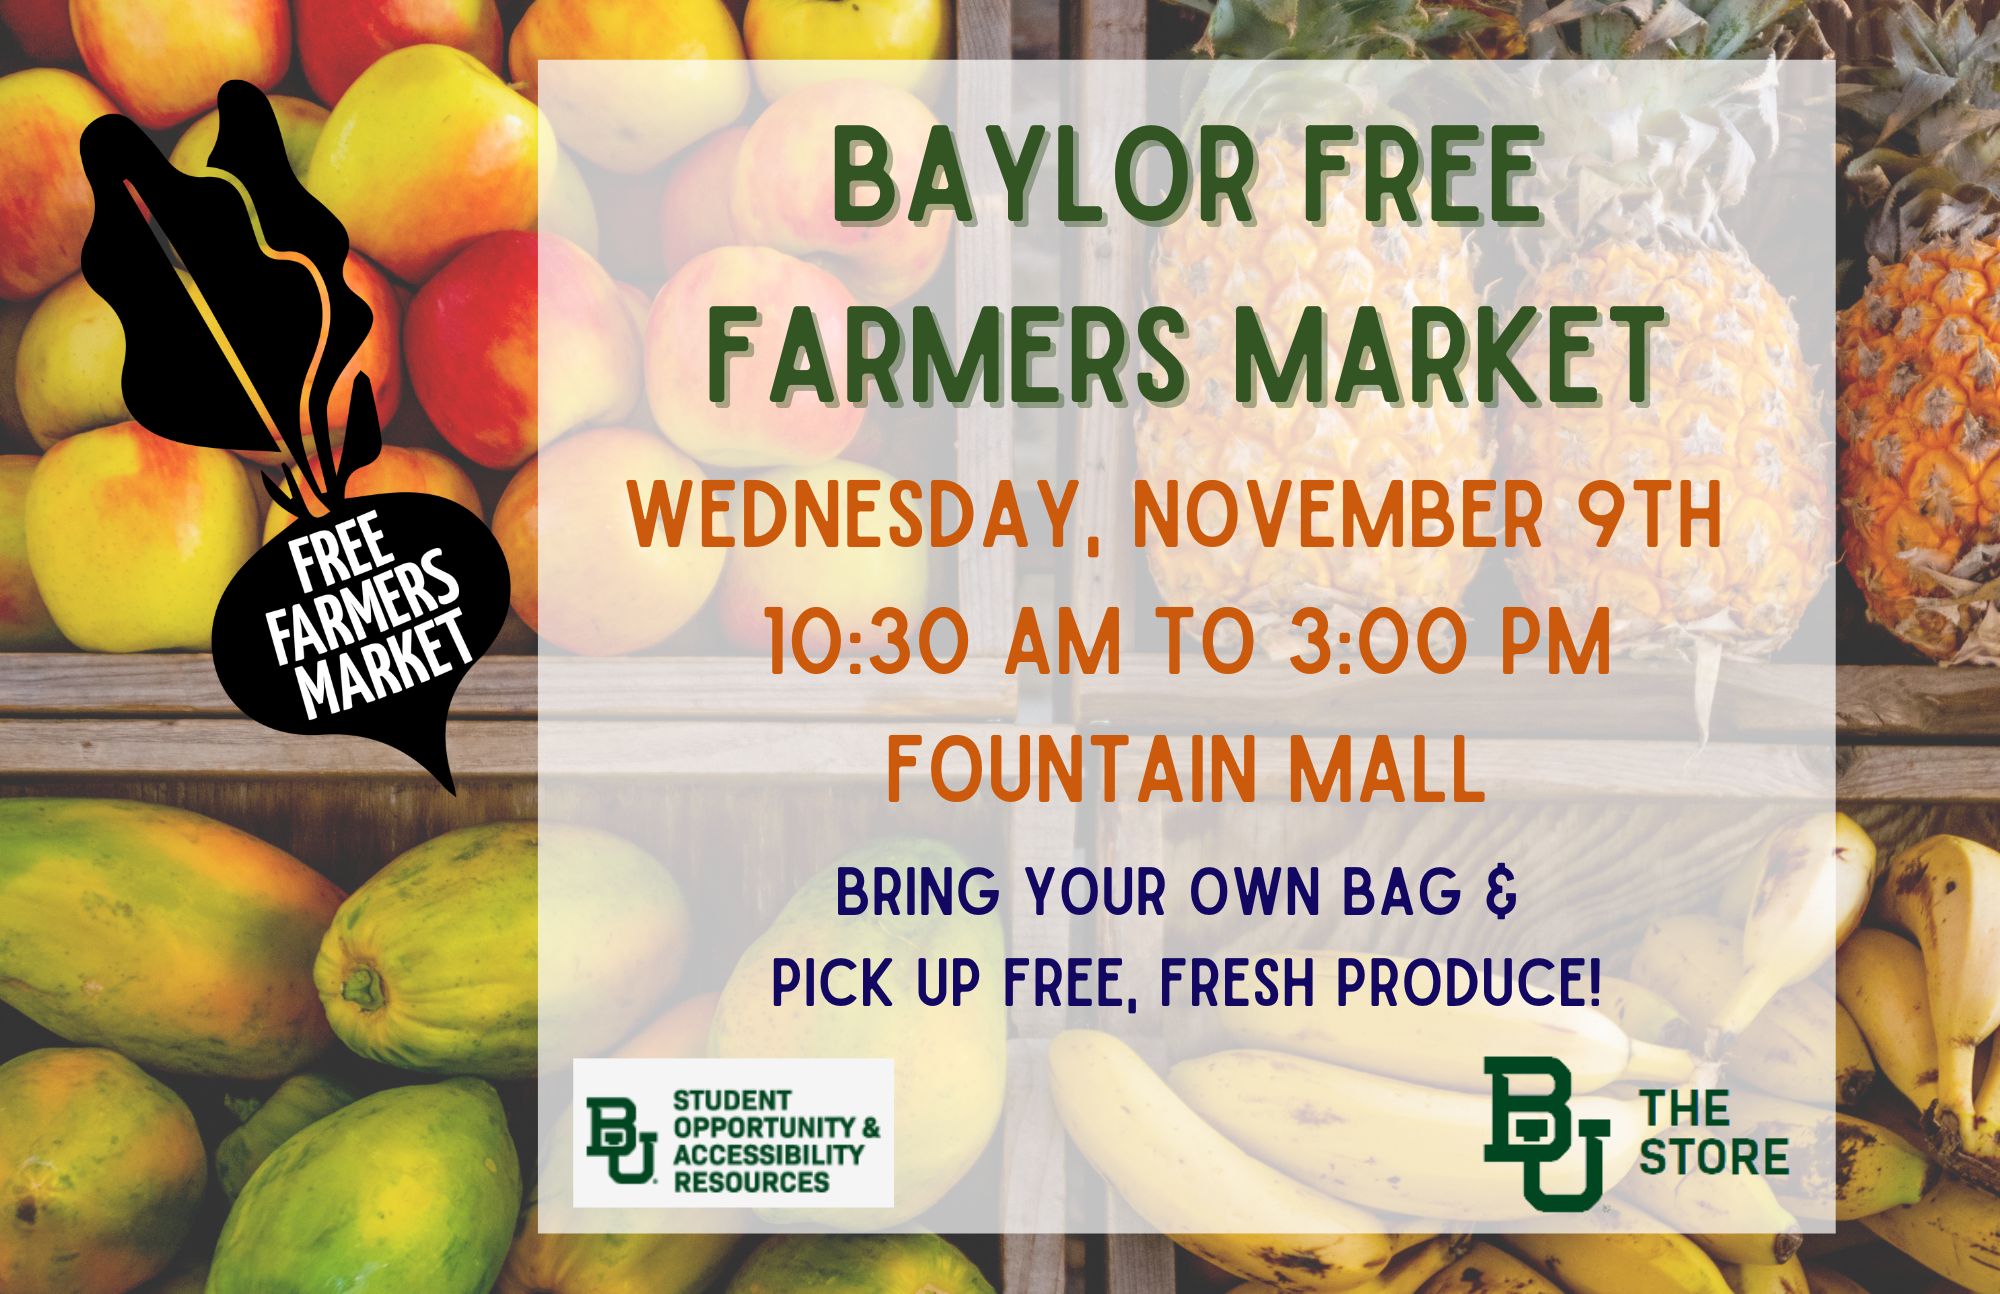 Wednesday, November 9 the Baylor Free Farmers Market will be on campus to hand out literal tons of food. The farmers market is free for all students. You are encouraged to bring your own bag to pick out fresh produce from 10:30am – 3:00pm in Fountain Mall. 